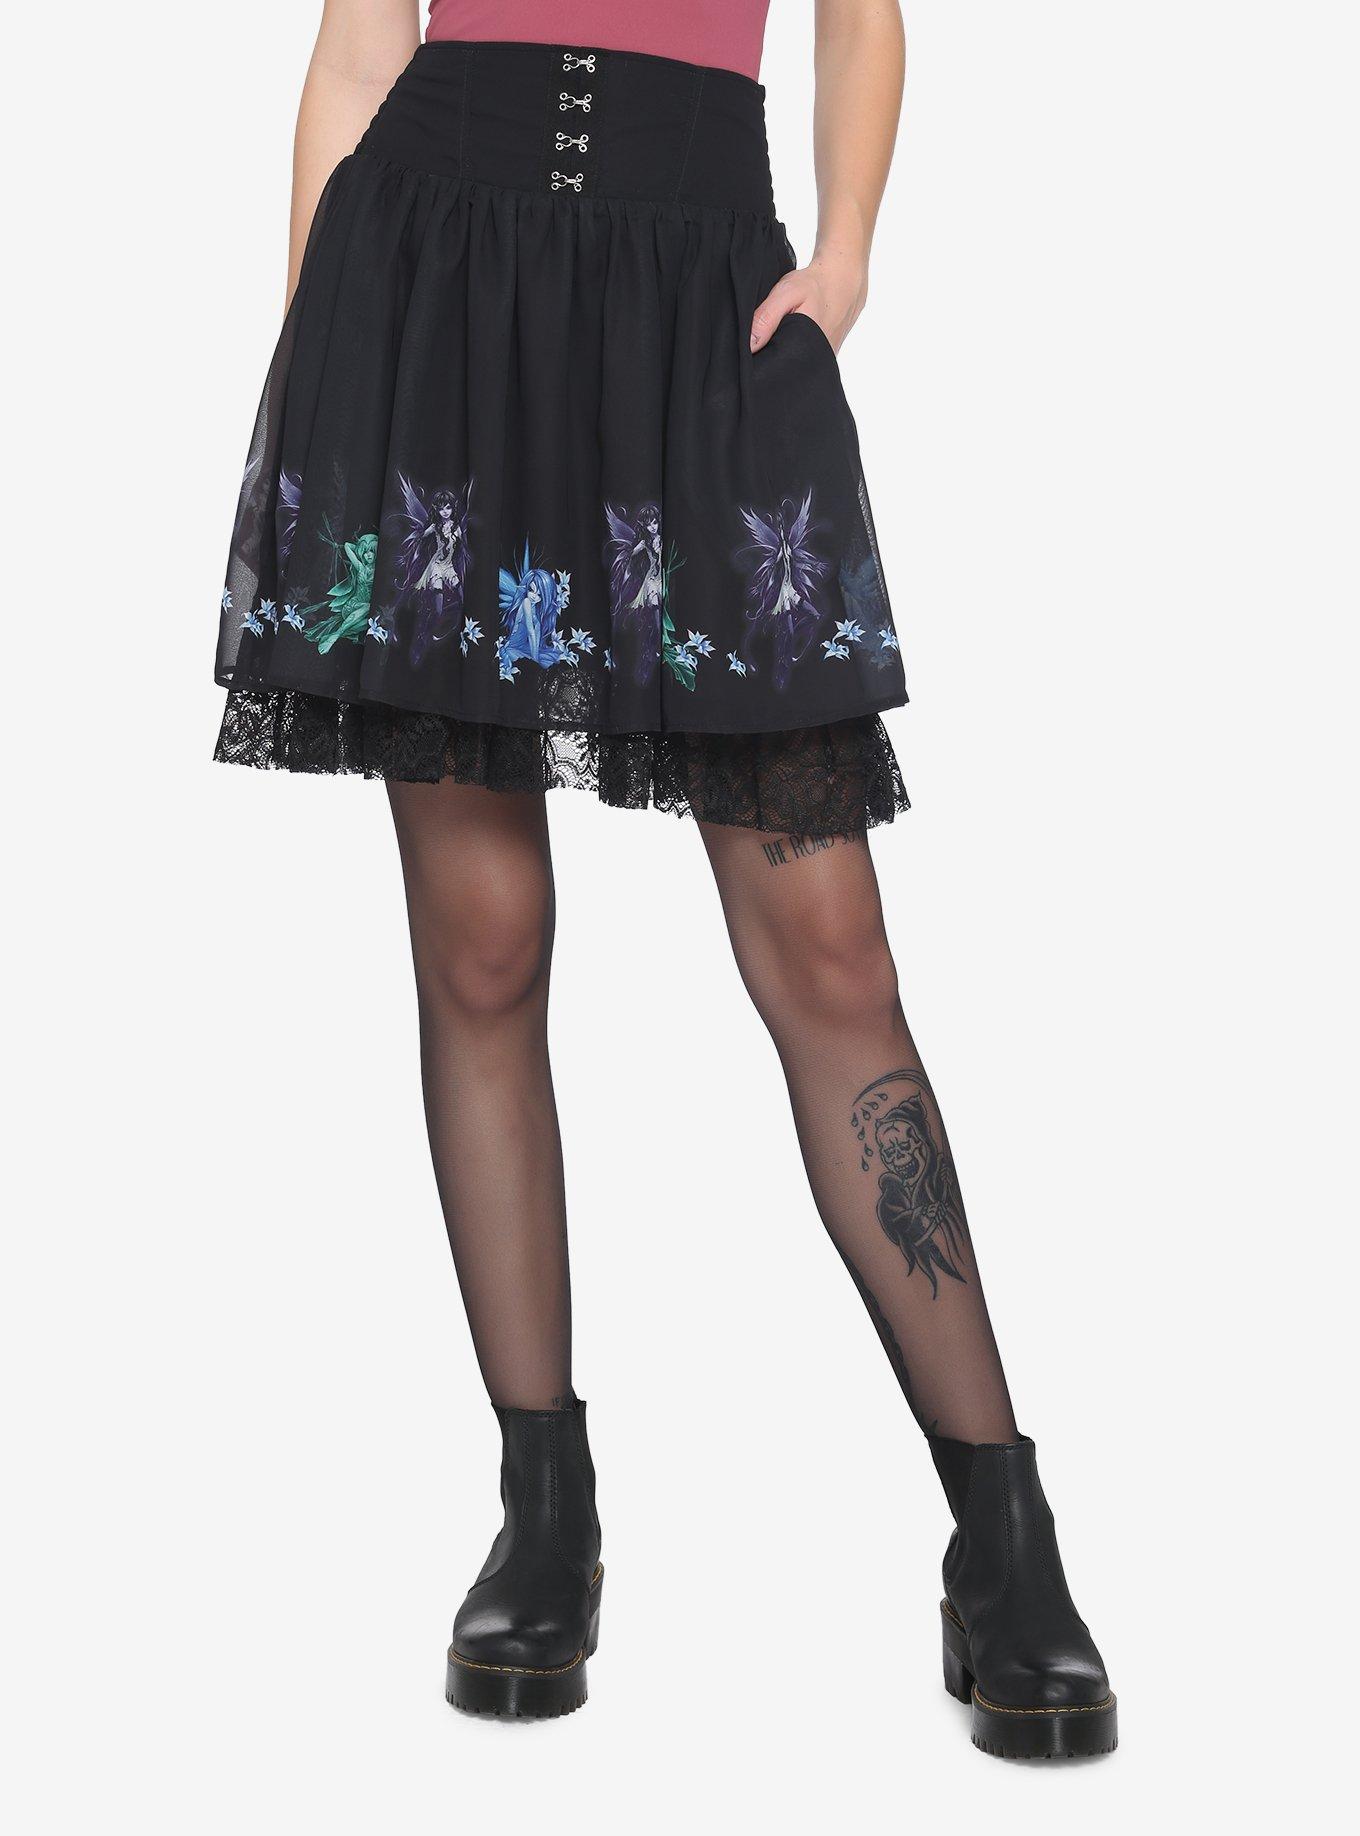 Fairies By Trick Lace Skirt, MULTI, hi-res